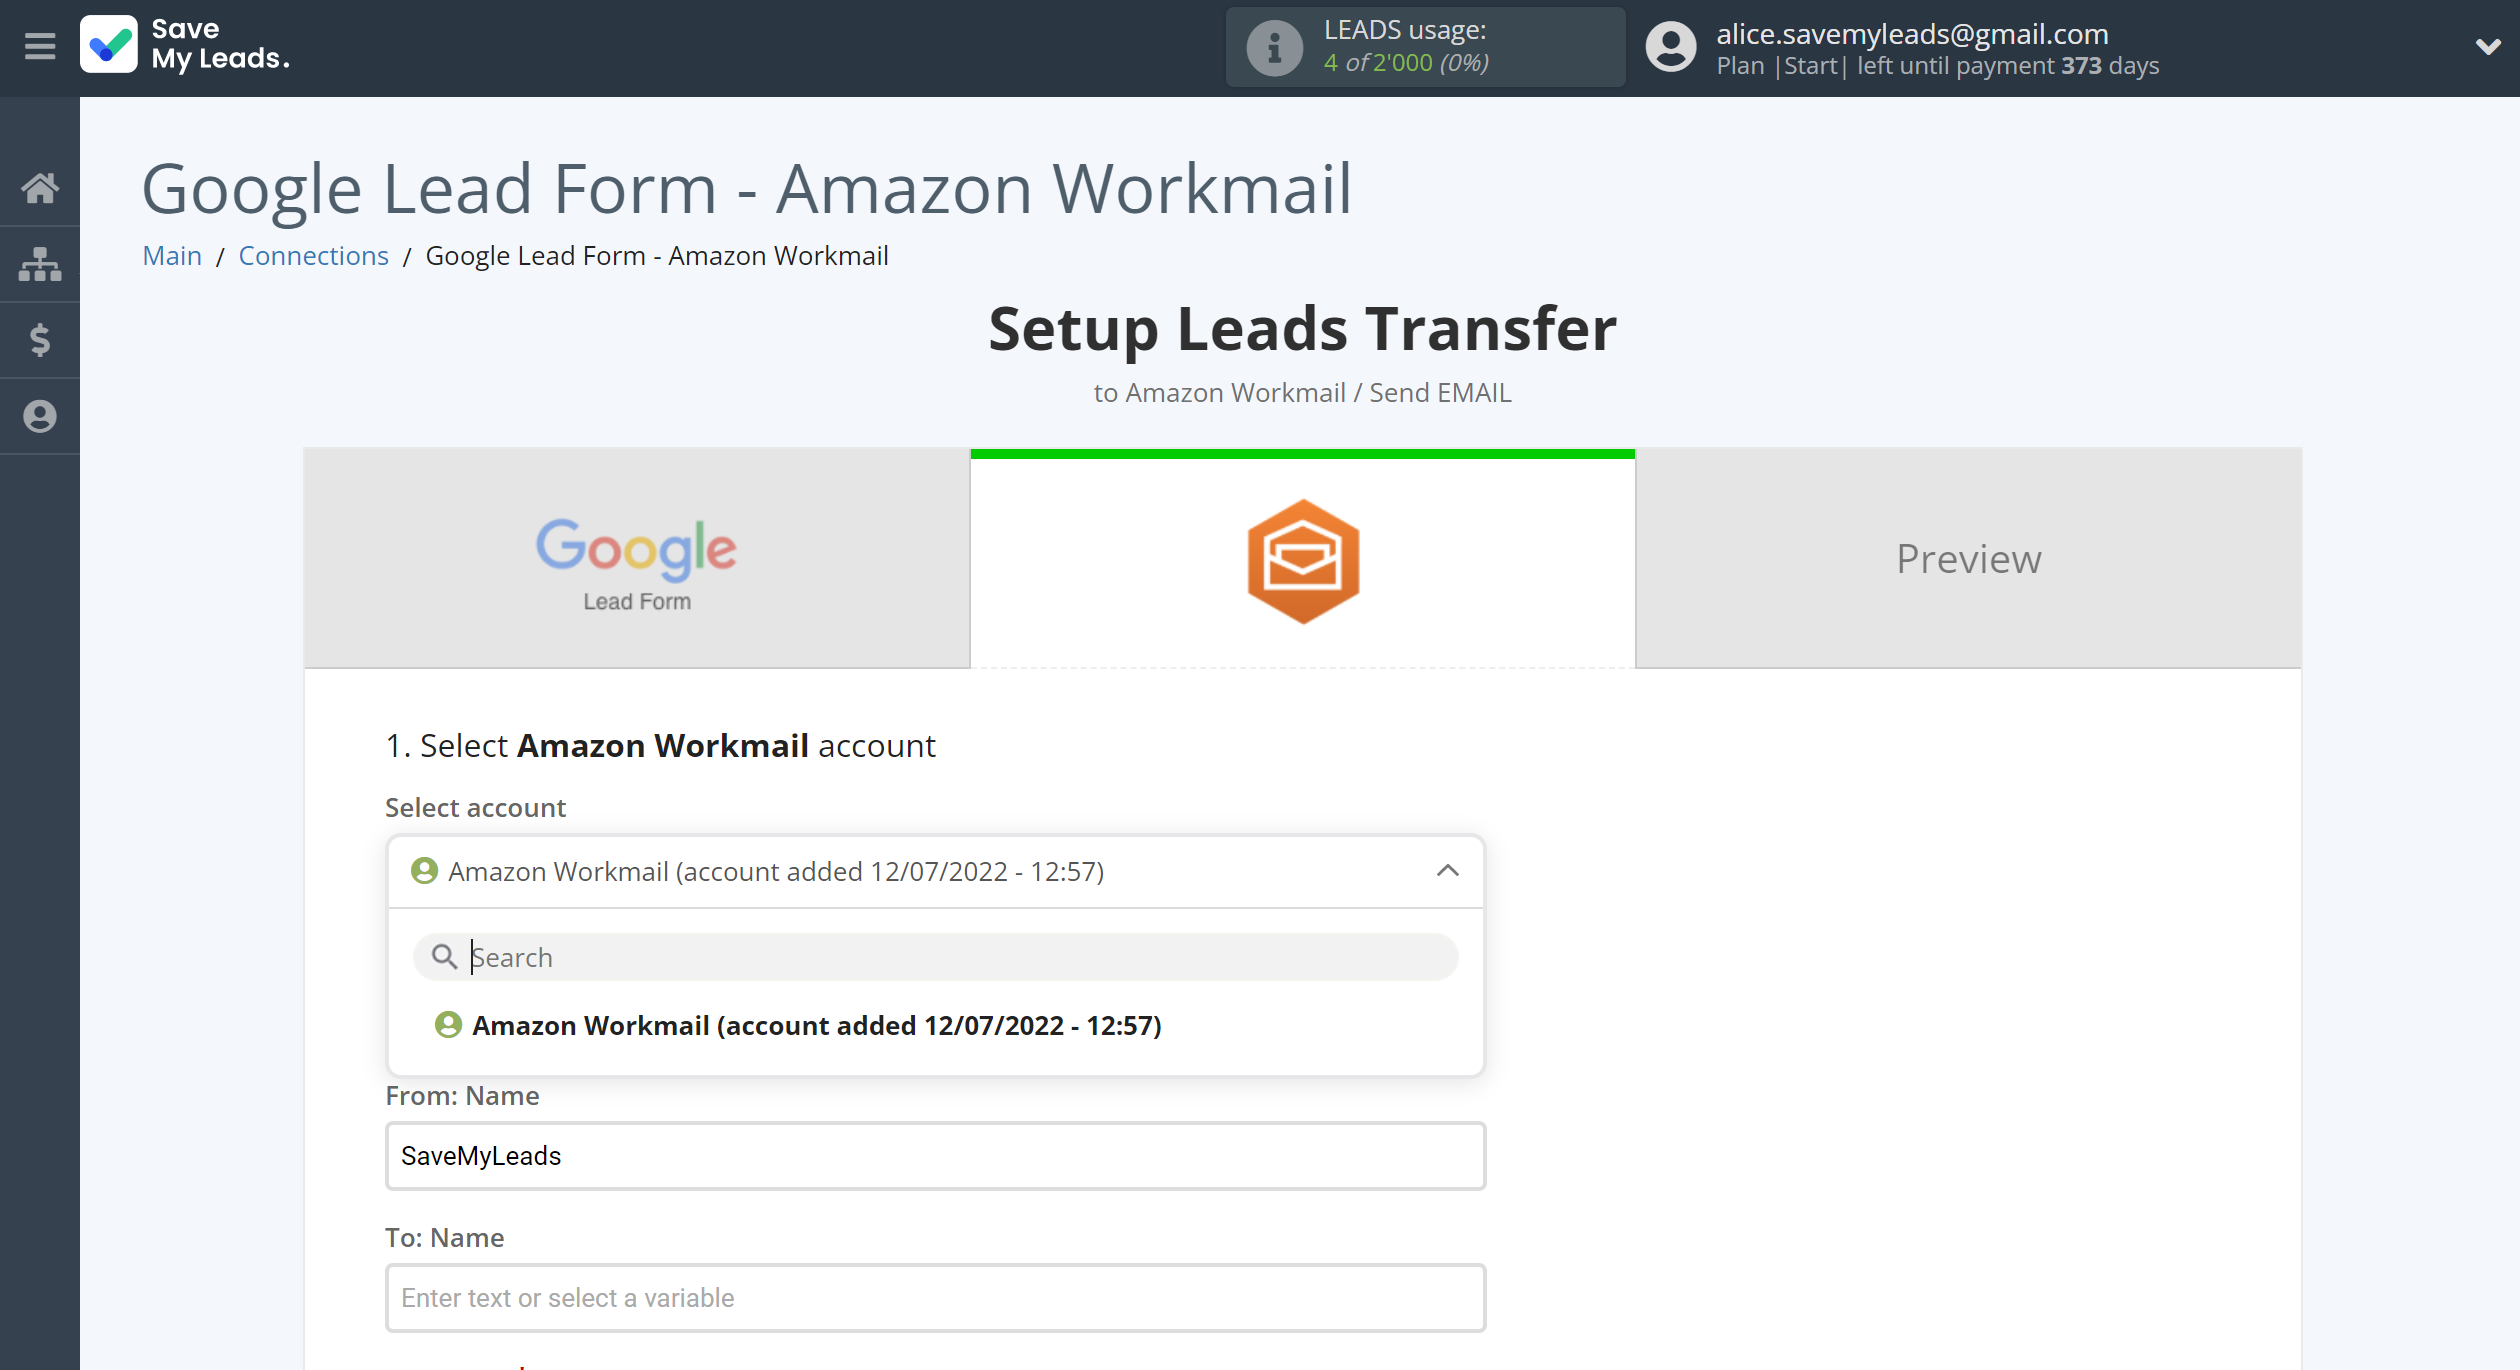 How to Connect Google Lead Form with Amazon Workmail | Data Destination account selection